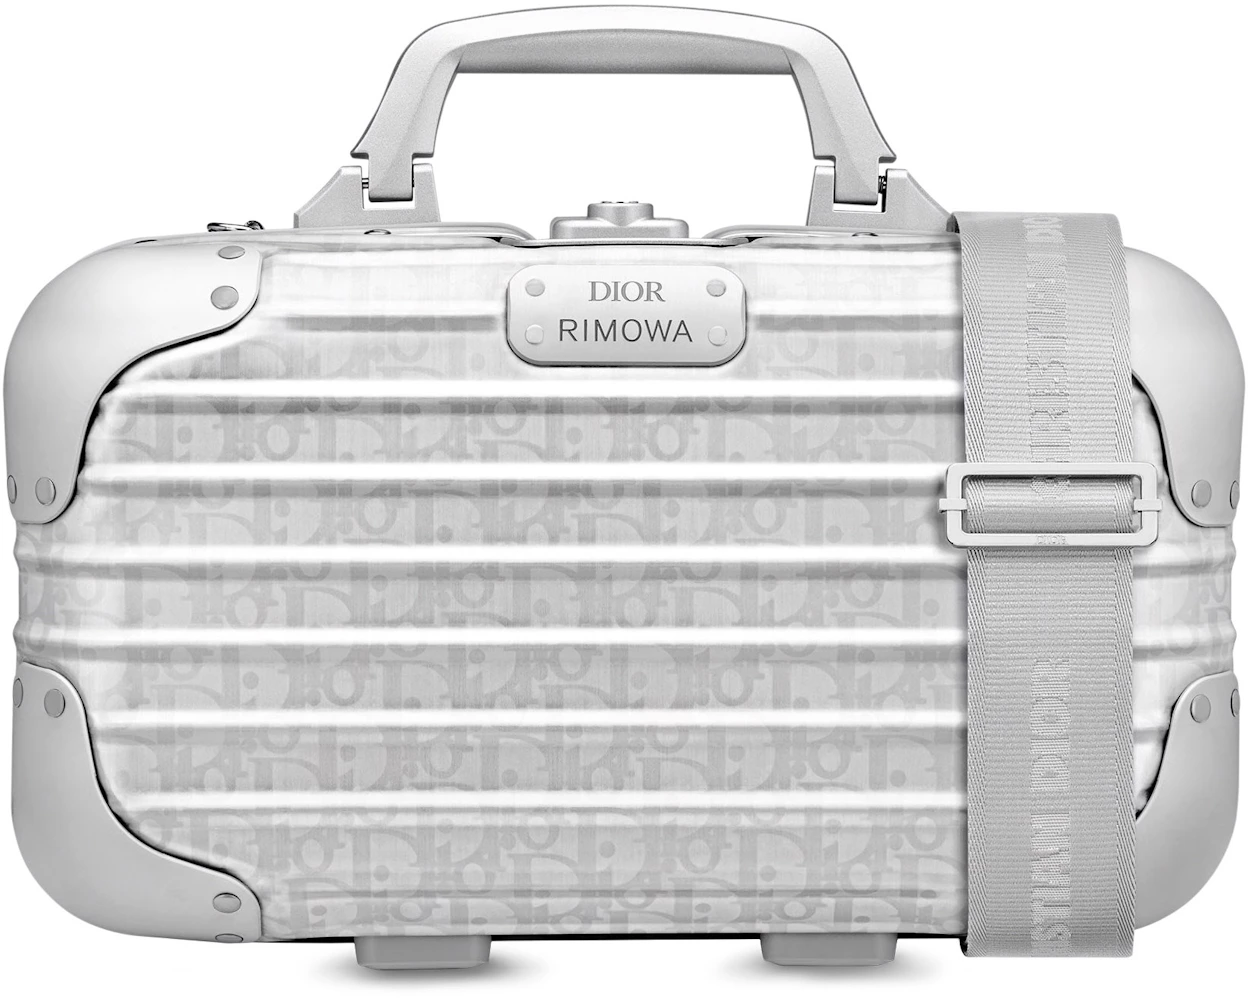 DIOR AND RIMOWA Carry-On Luggage